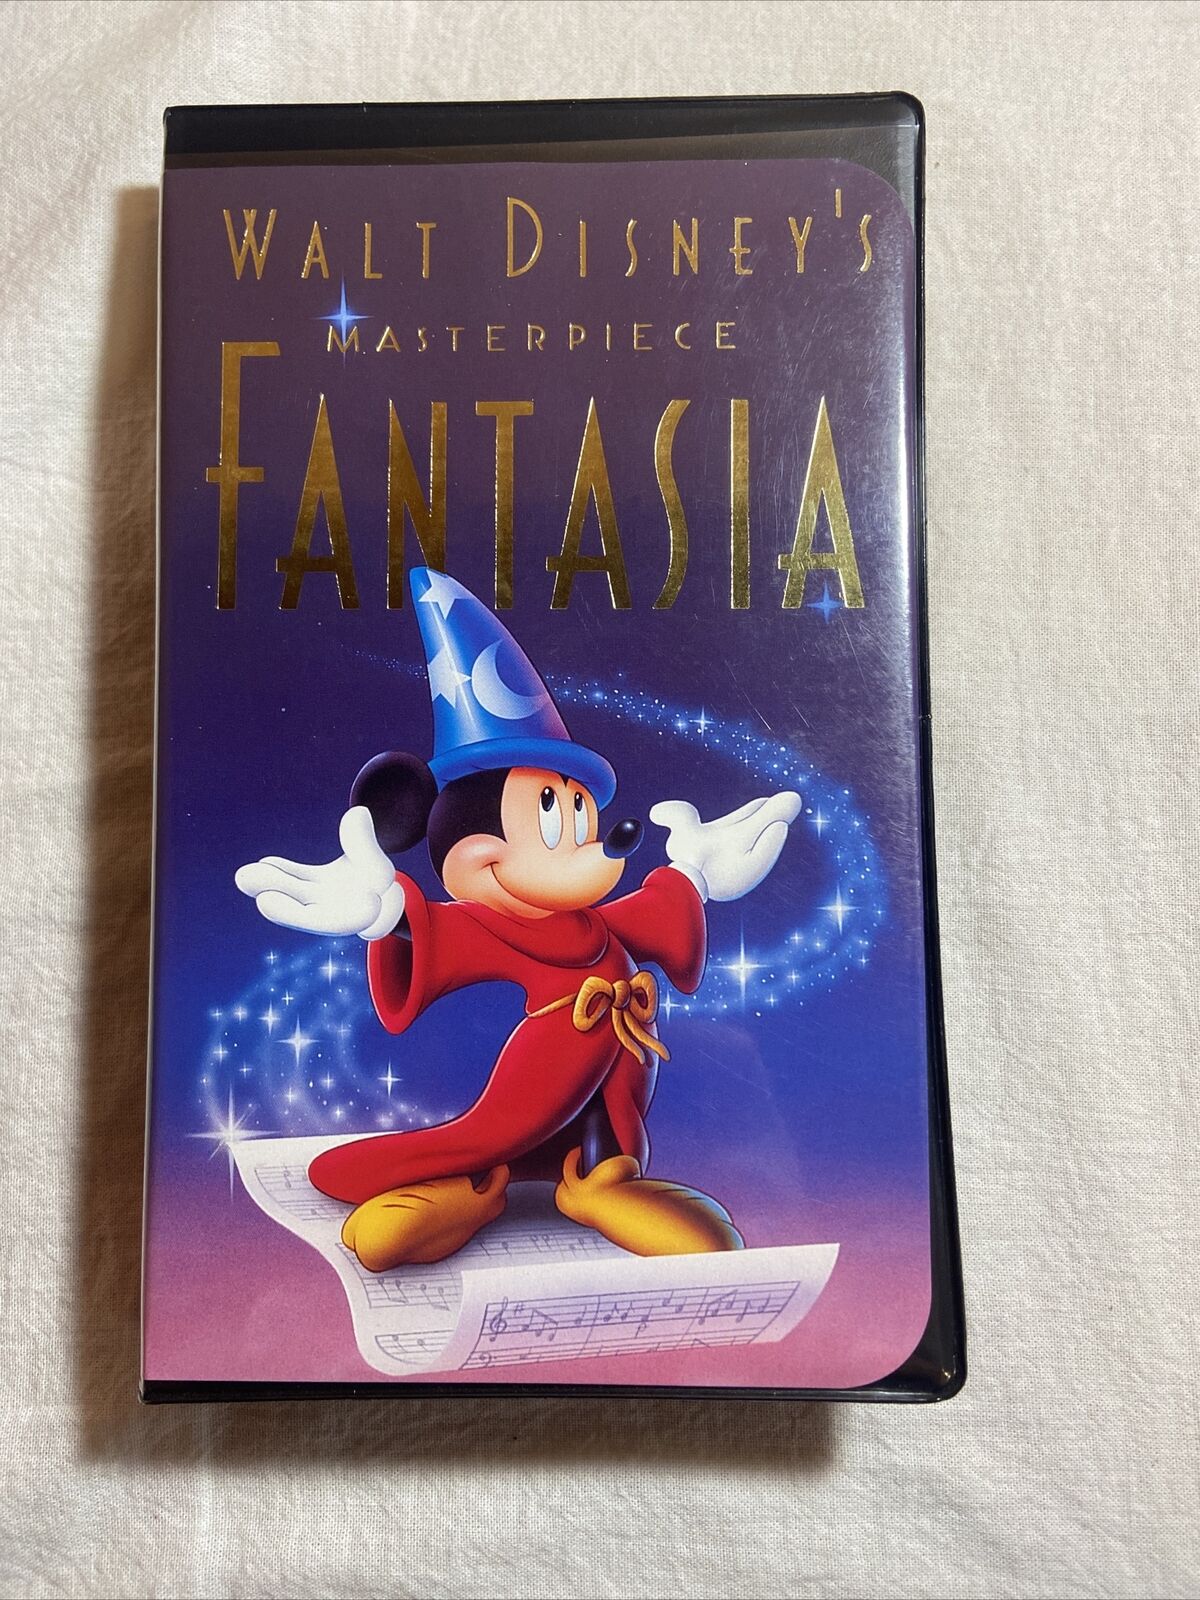 Fantasia (VHS, 1991) With Original Inserts